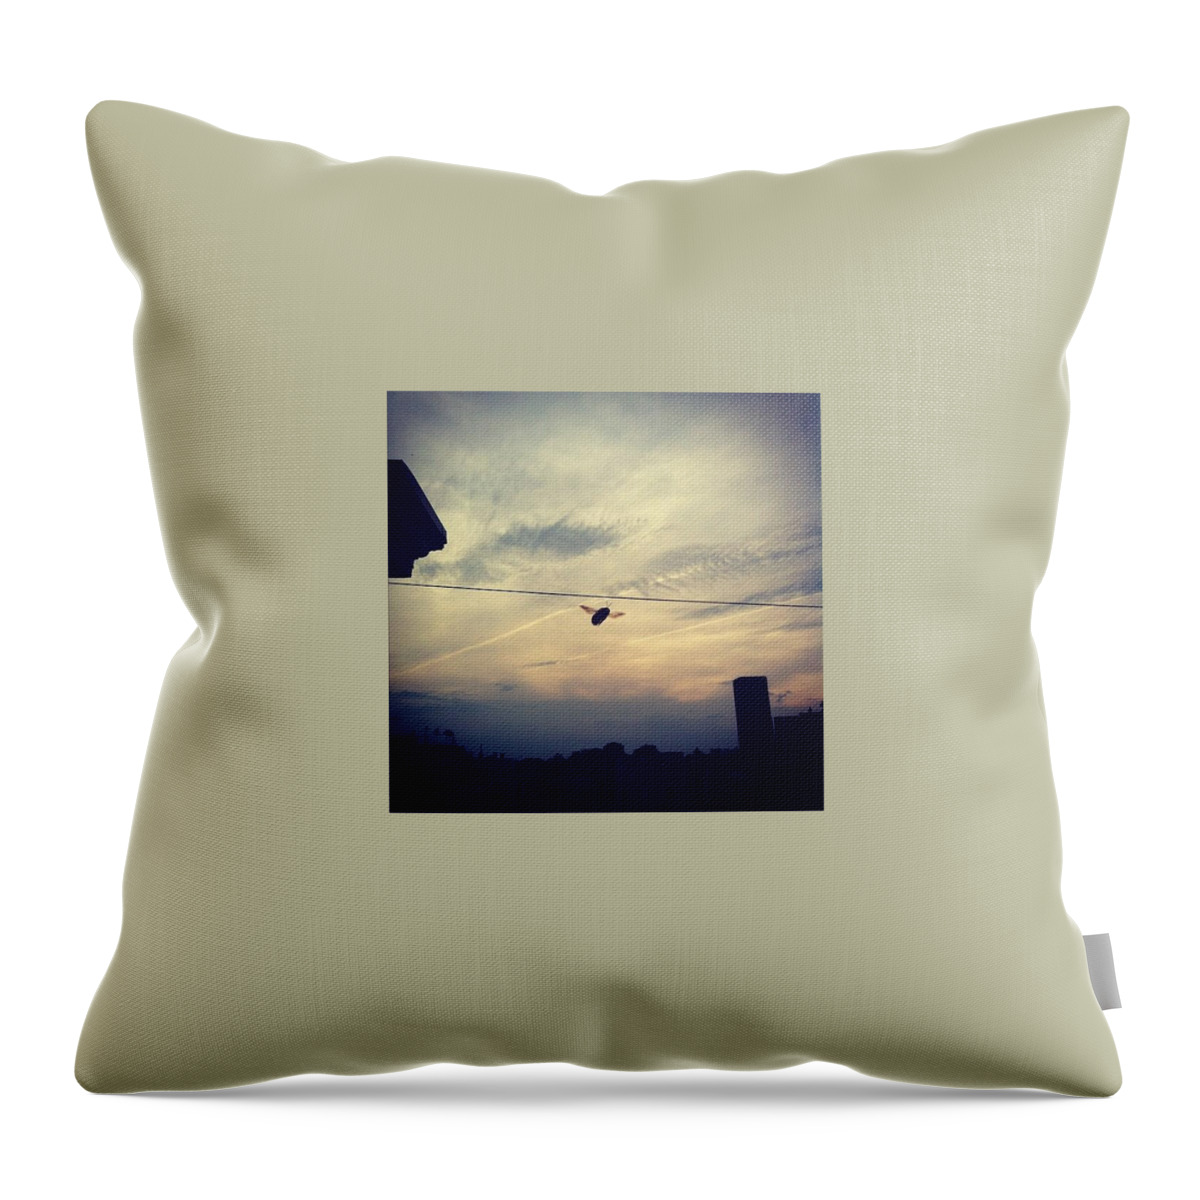 Bee Throw Pillow featuring the photograph Carpenter Bees Abound On The Deck by Katie Cupcakes